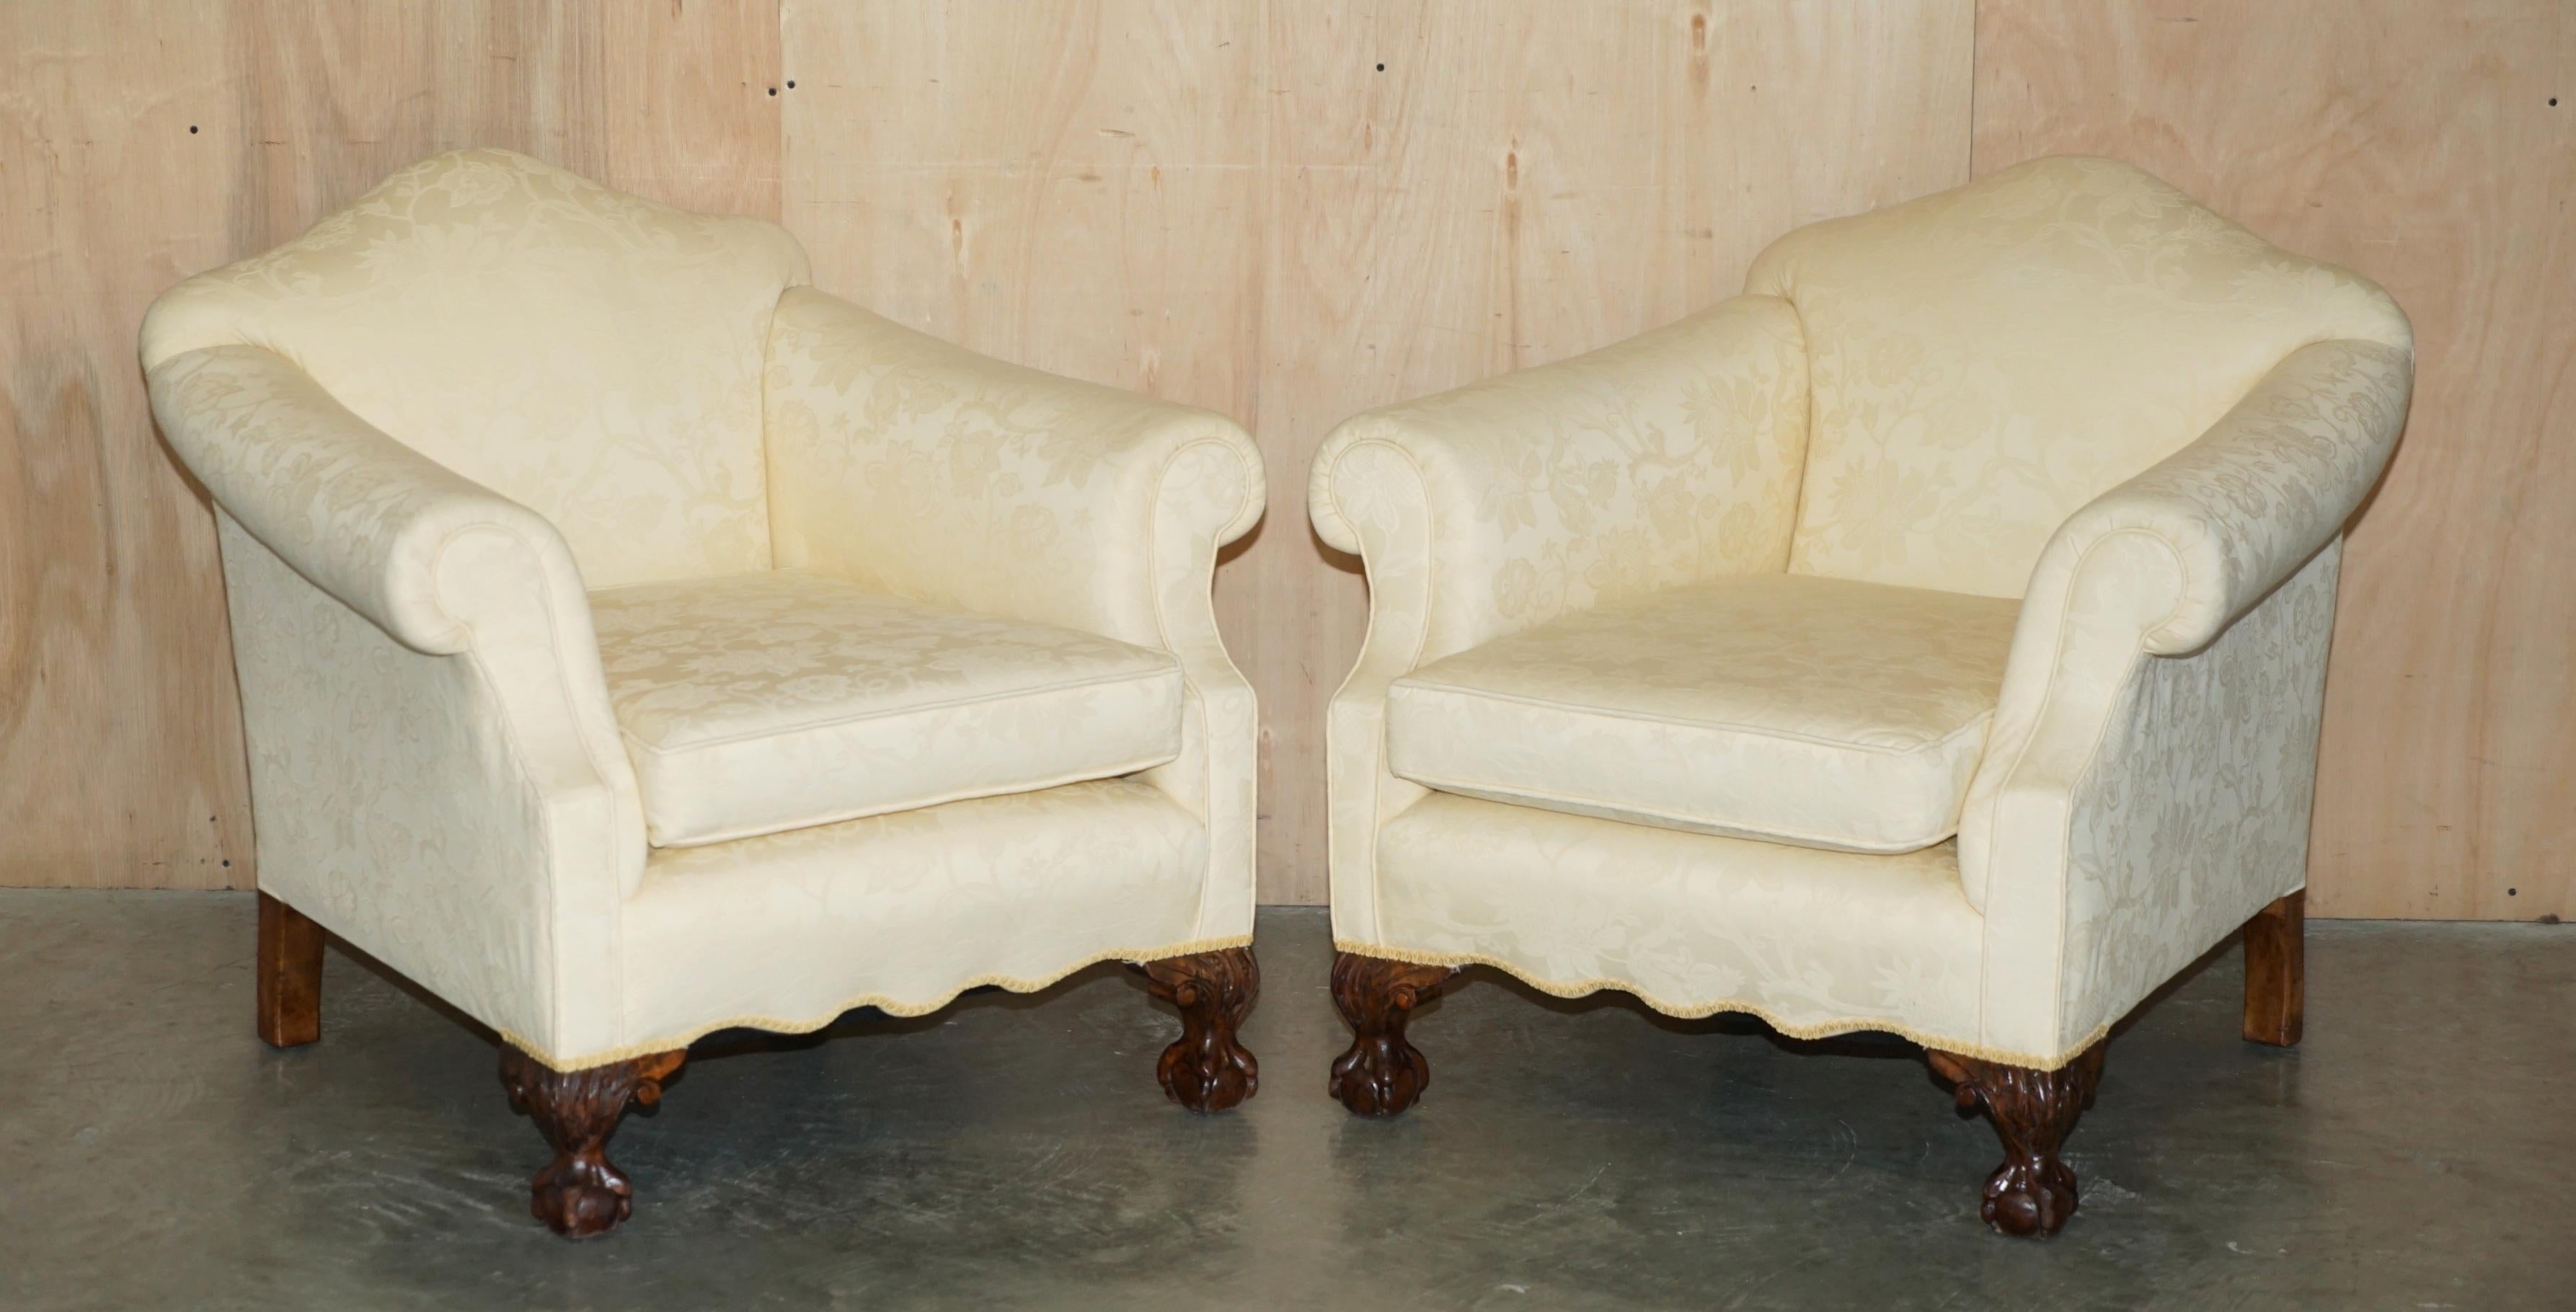 Royal House Antiques

Royal House Antiques is delighted to offer for sale this stunning pair of circa 1910 hand made in England hump back club armchairs with ornately carved Claw & Ball feet

Please note the delivery fee listed is just a guide, it